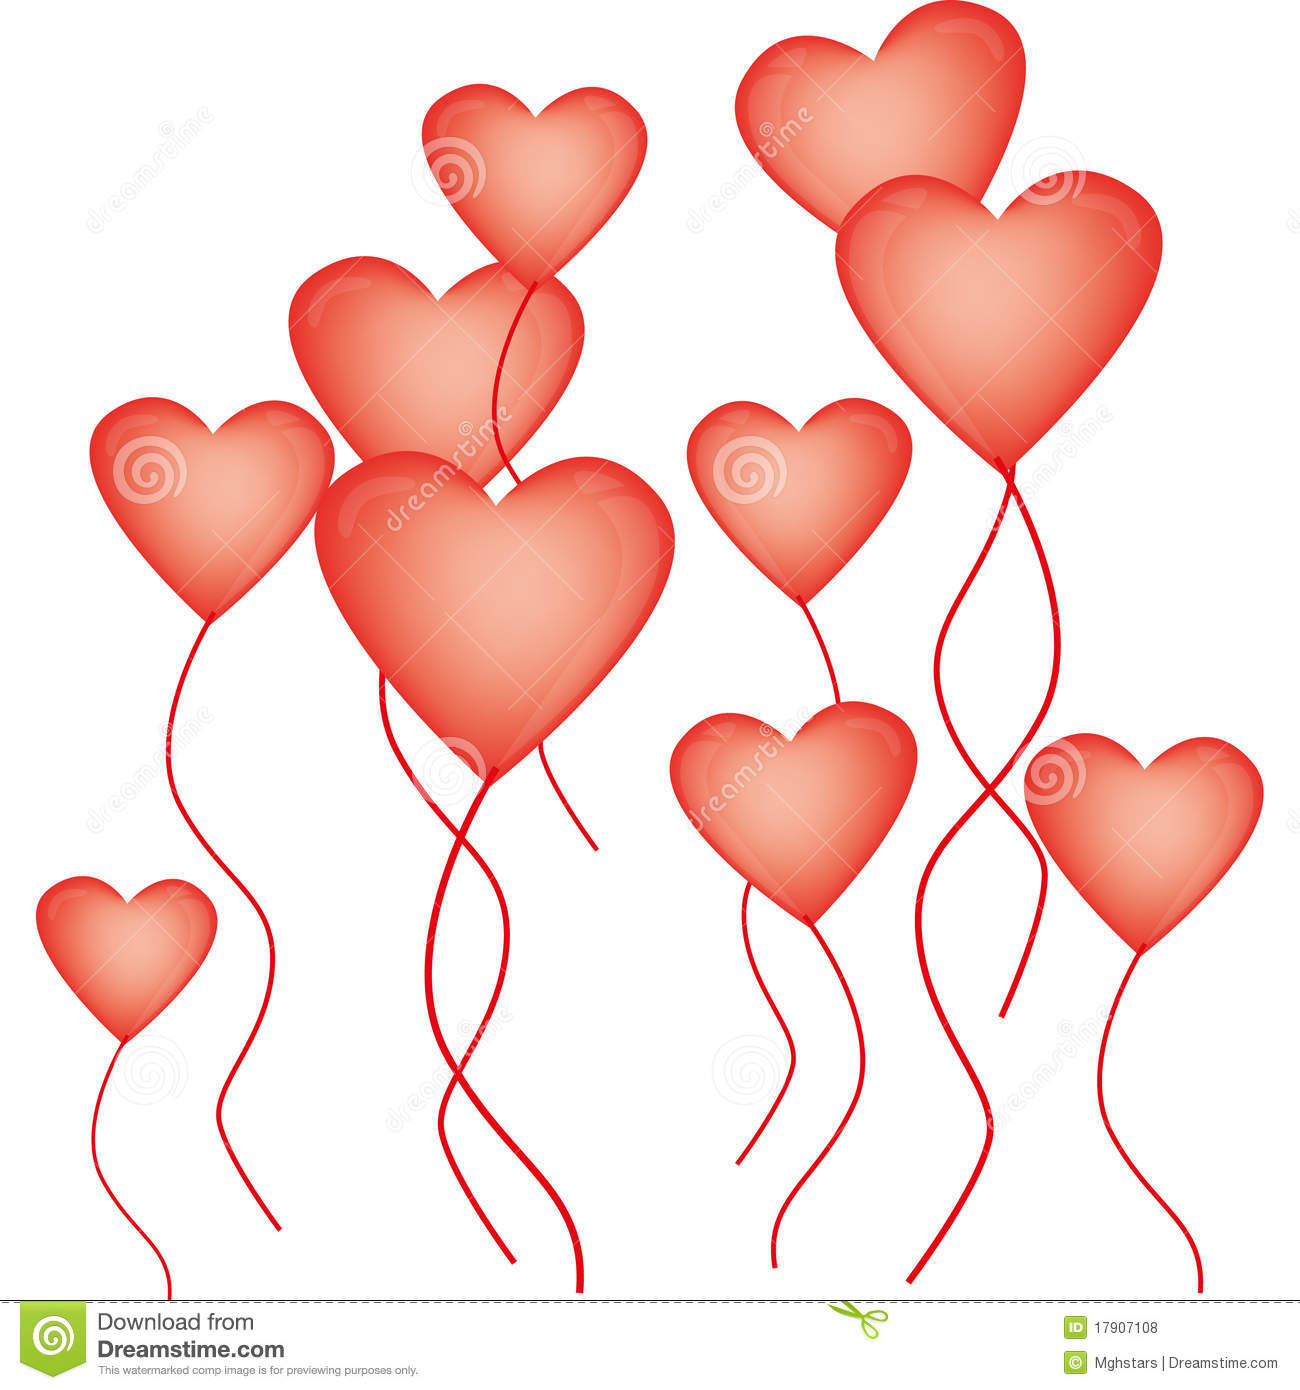 Heart Shaped Balloons For Valentine S Day Royalty Free Stock Photos